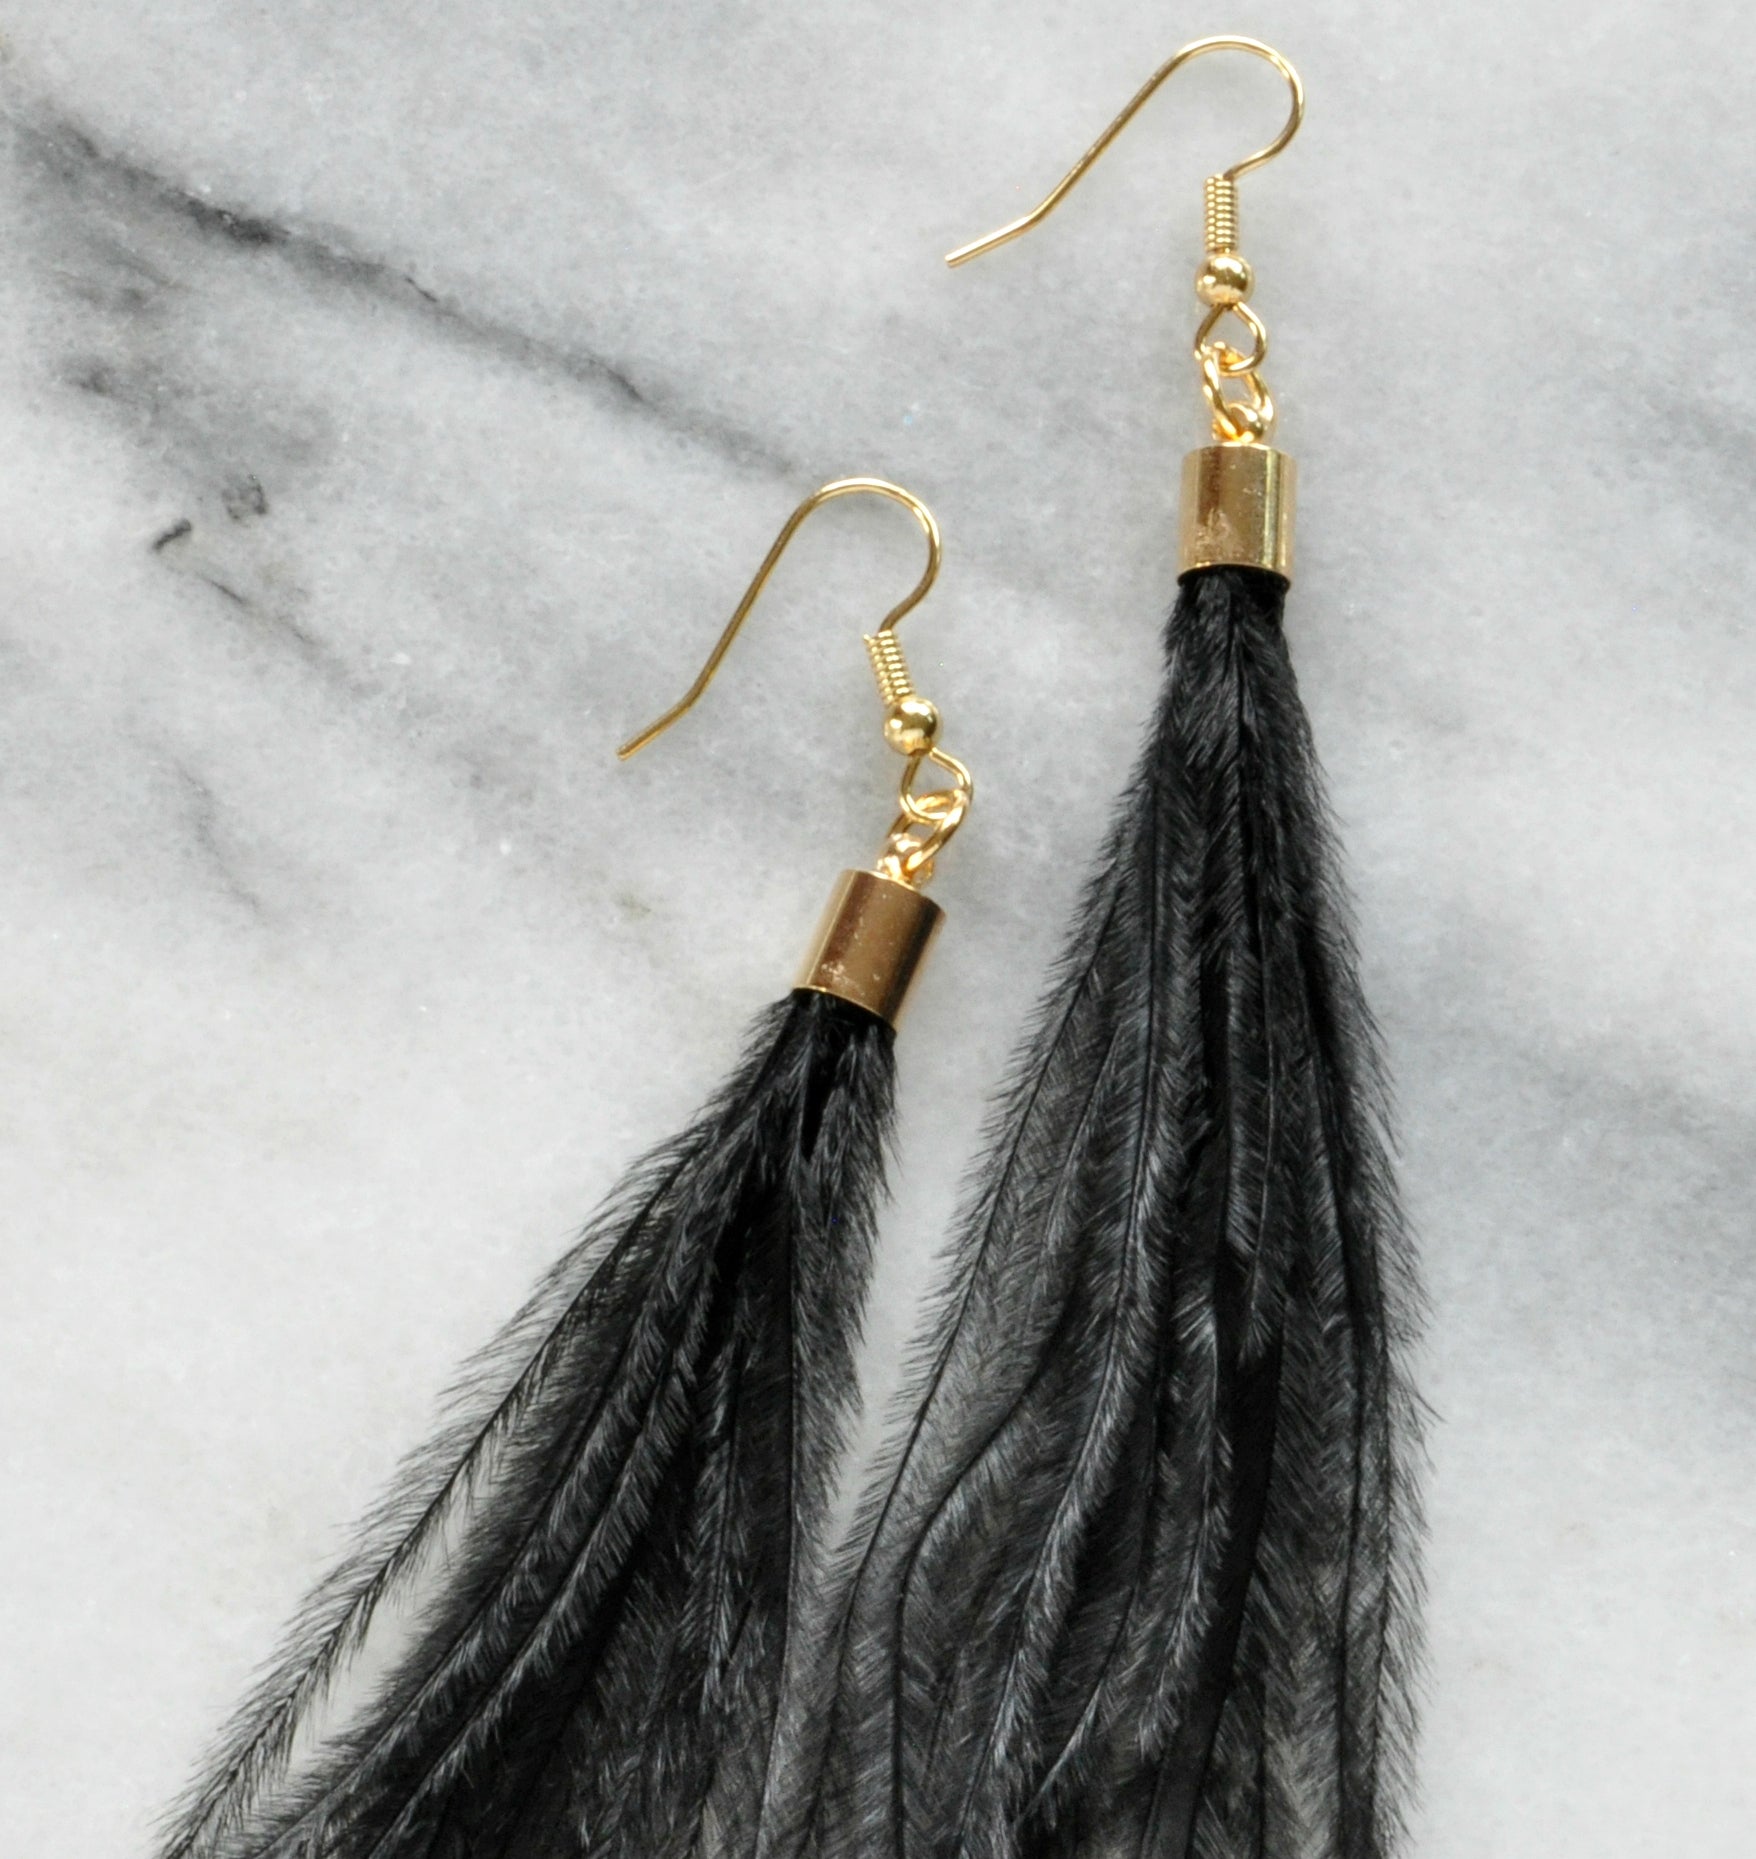 Libby & Smee Black Feather Earrings with Gold Caps, Still Life Close up